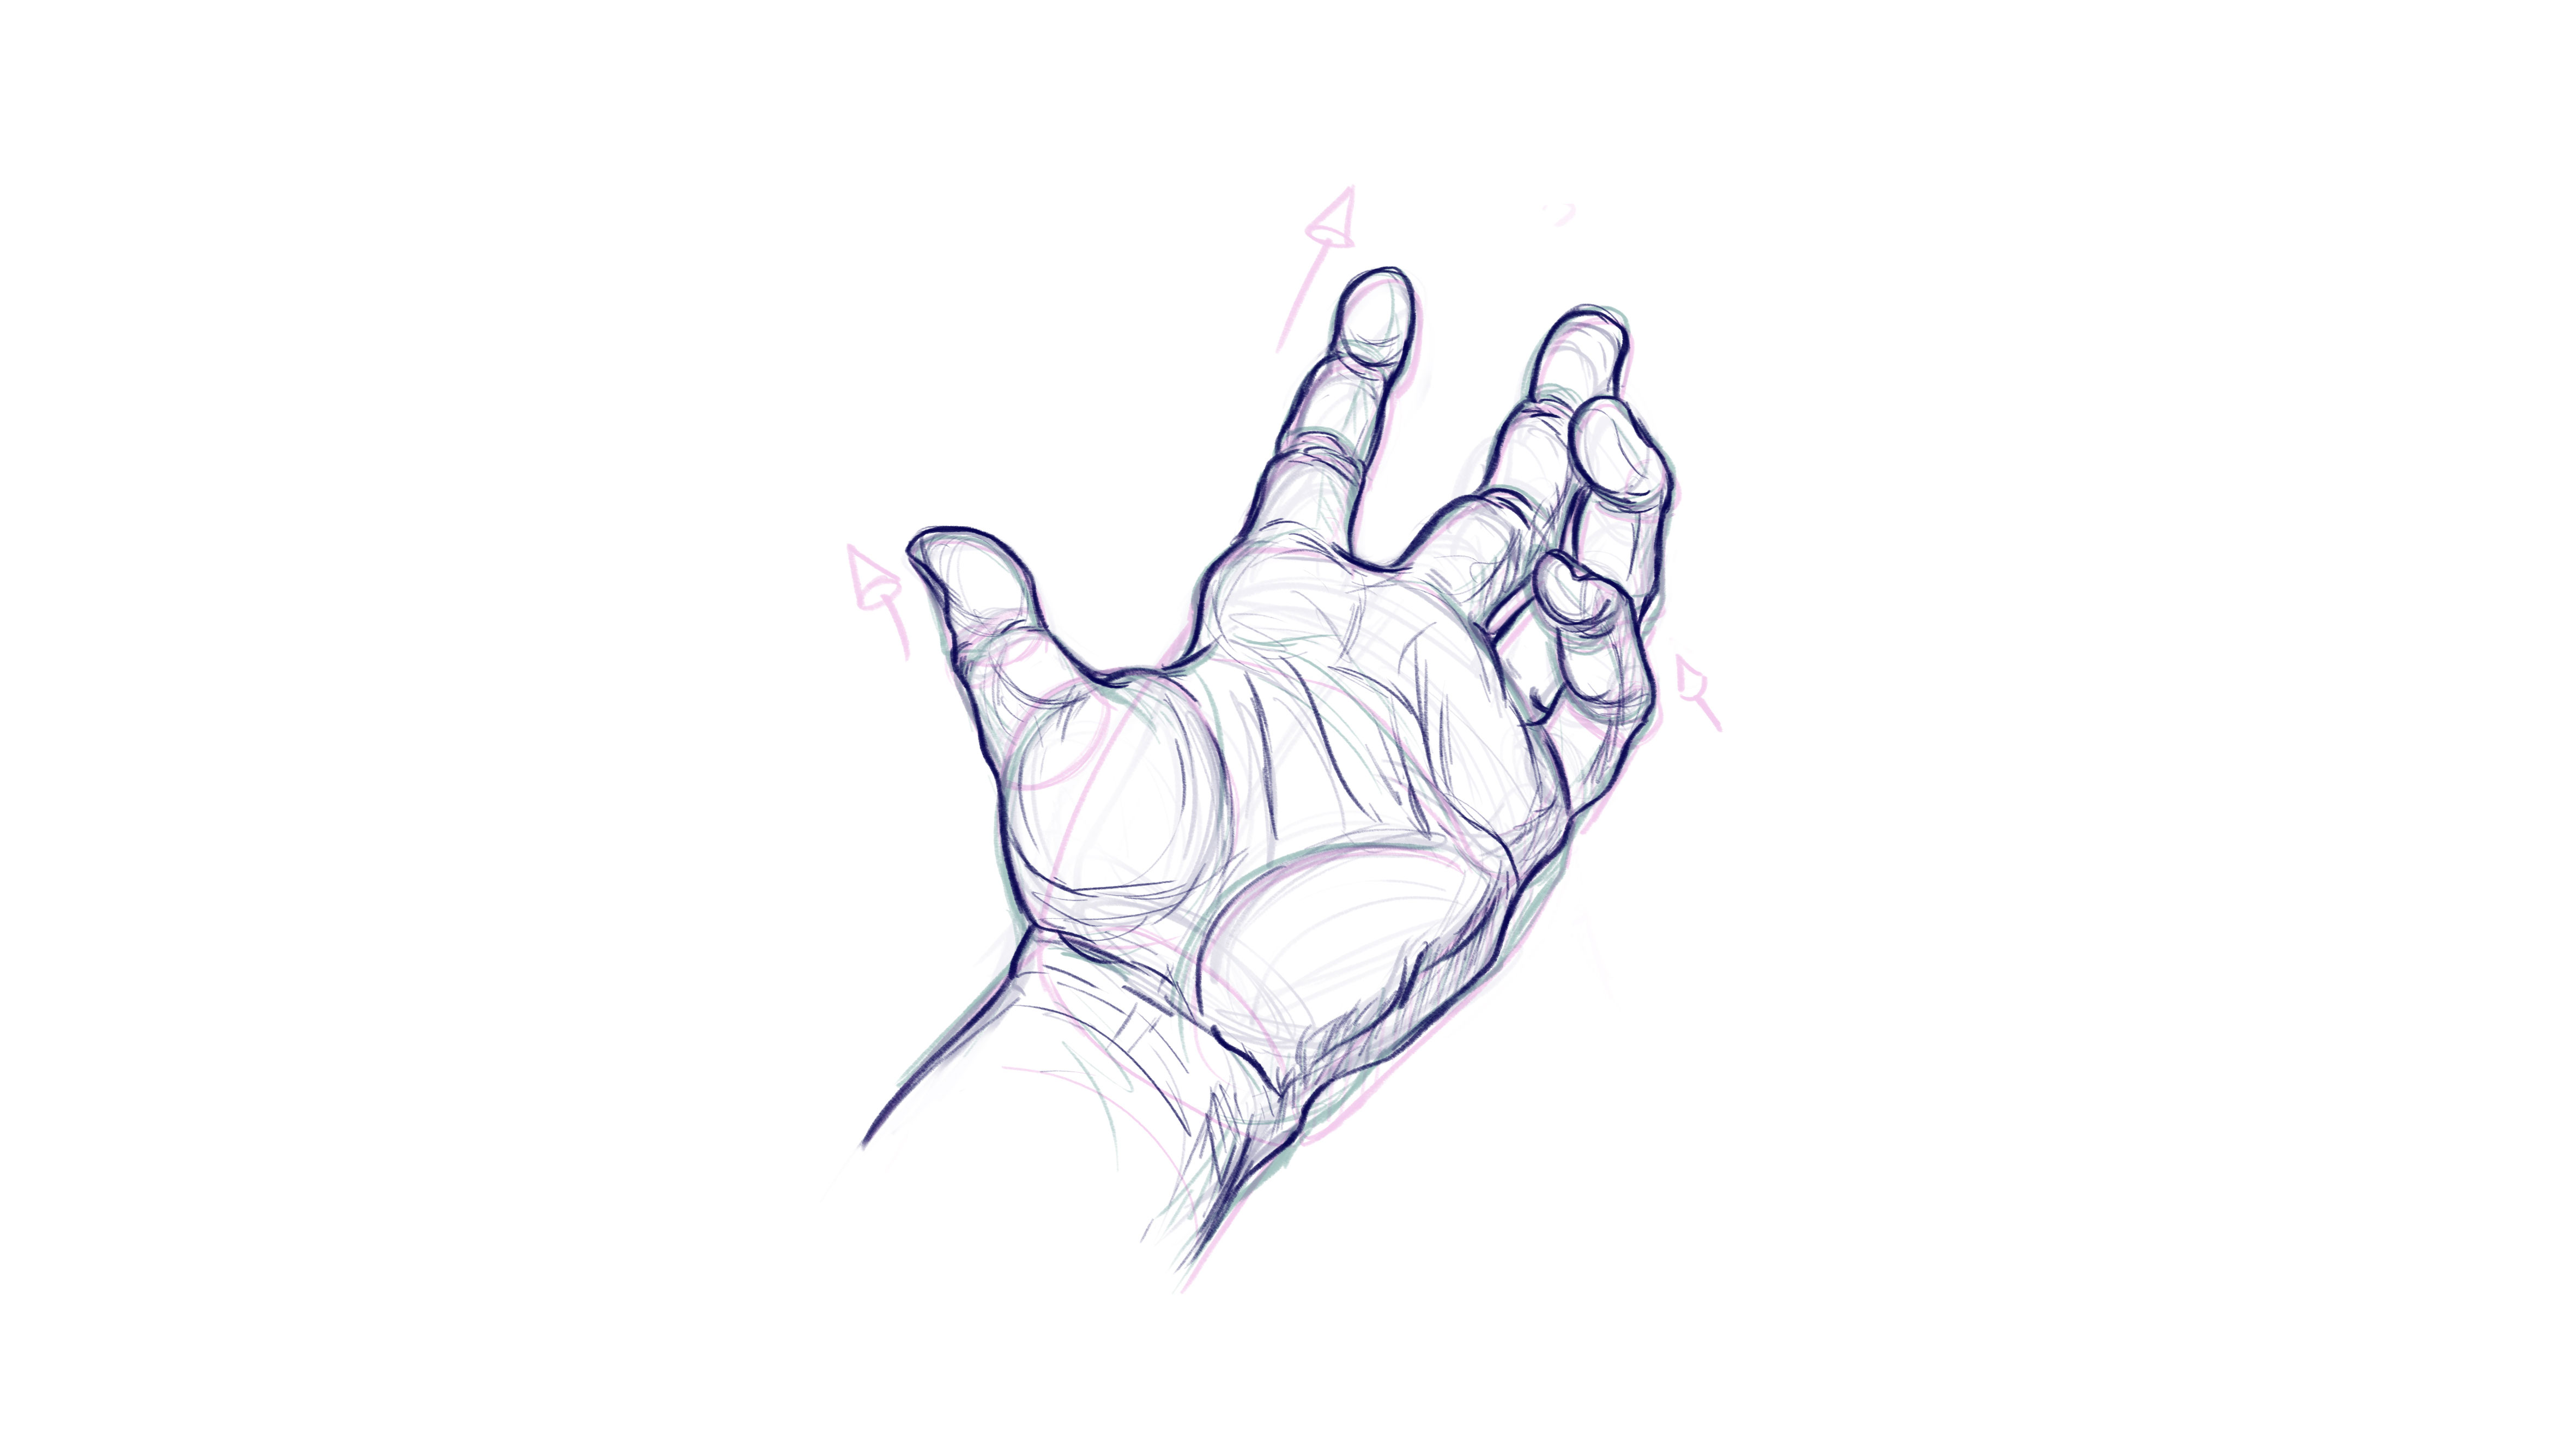 How to draw hands: a more detailed sketch of the hand